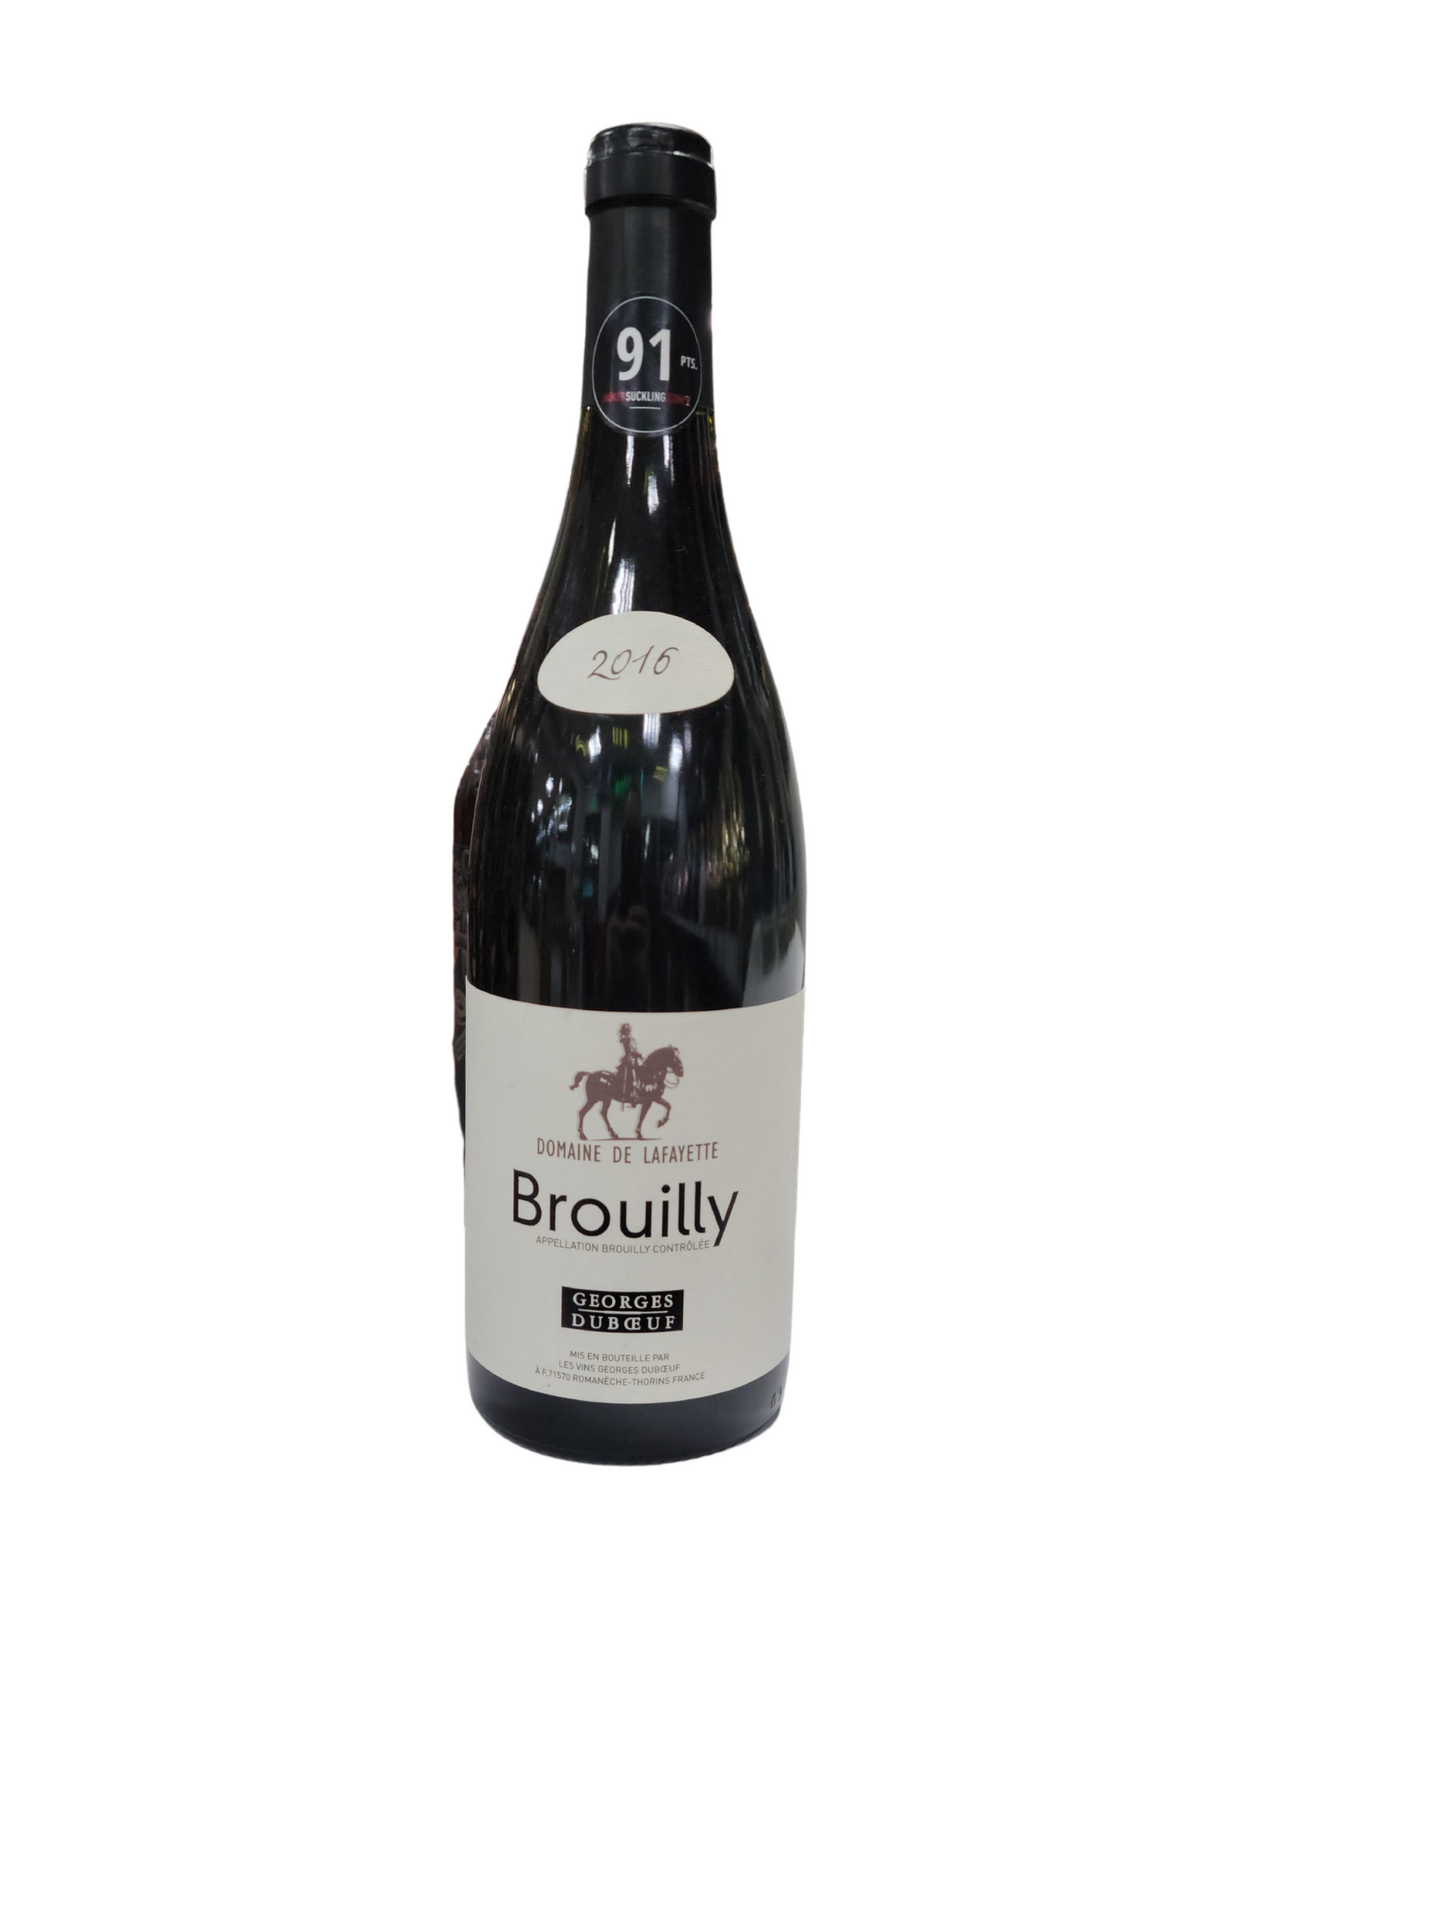 GEORGES DUBOEUF DOMAINE DE LAFAYETTE BROUILLY RED WINE FRANCE 2016